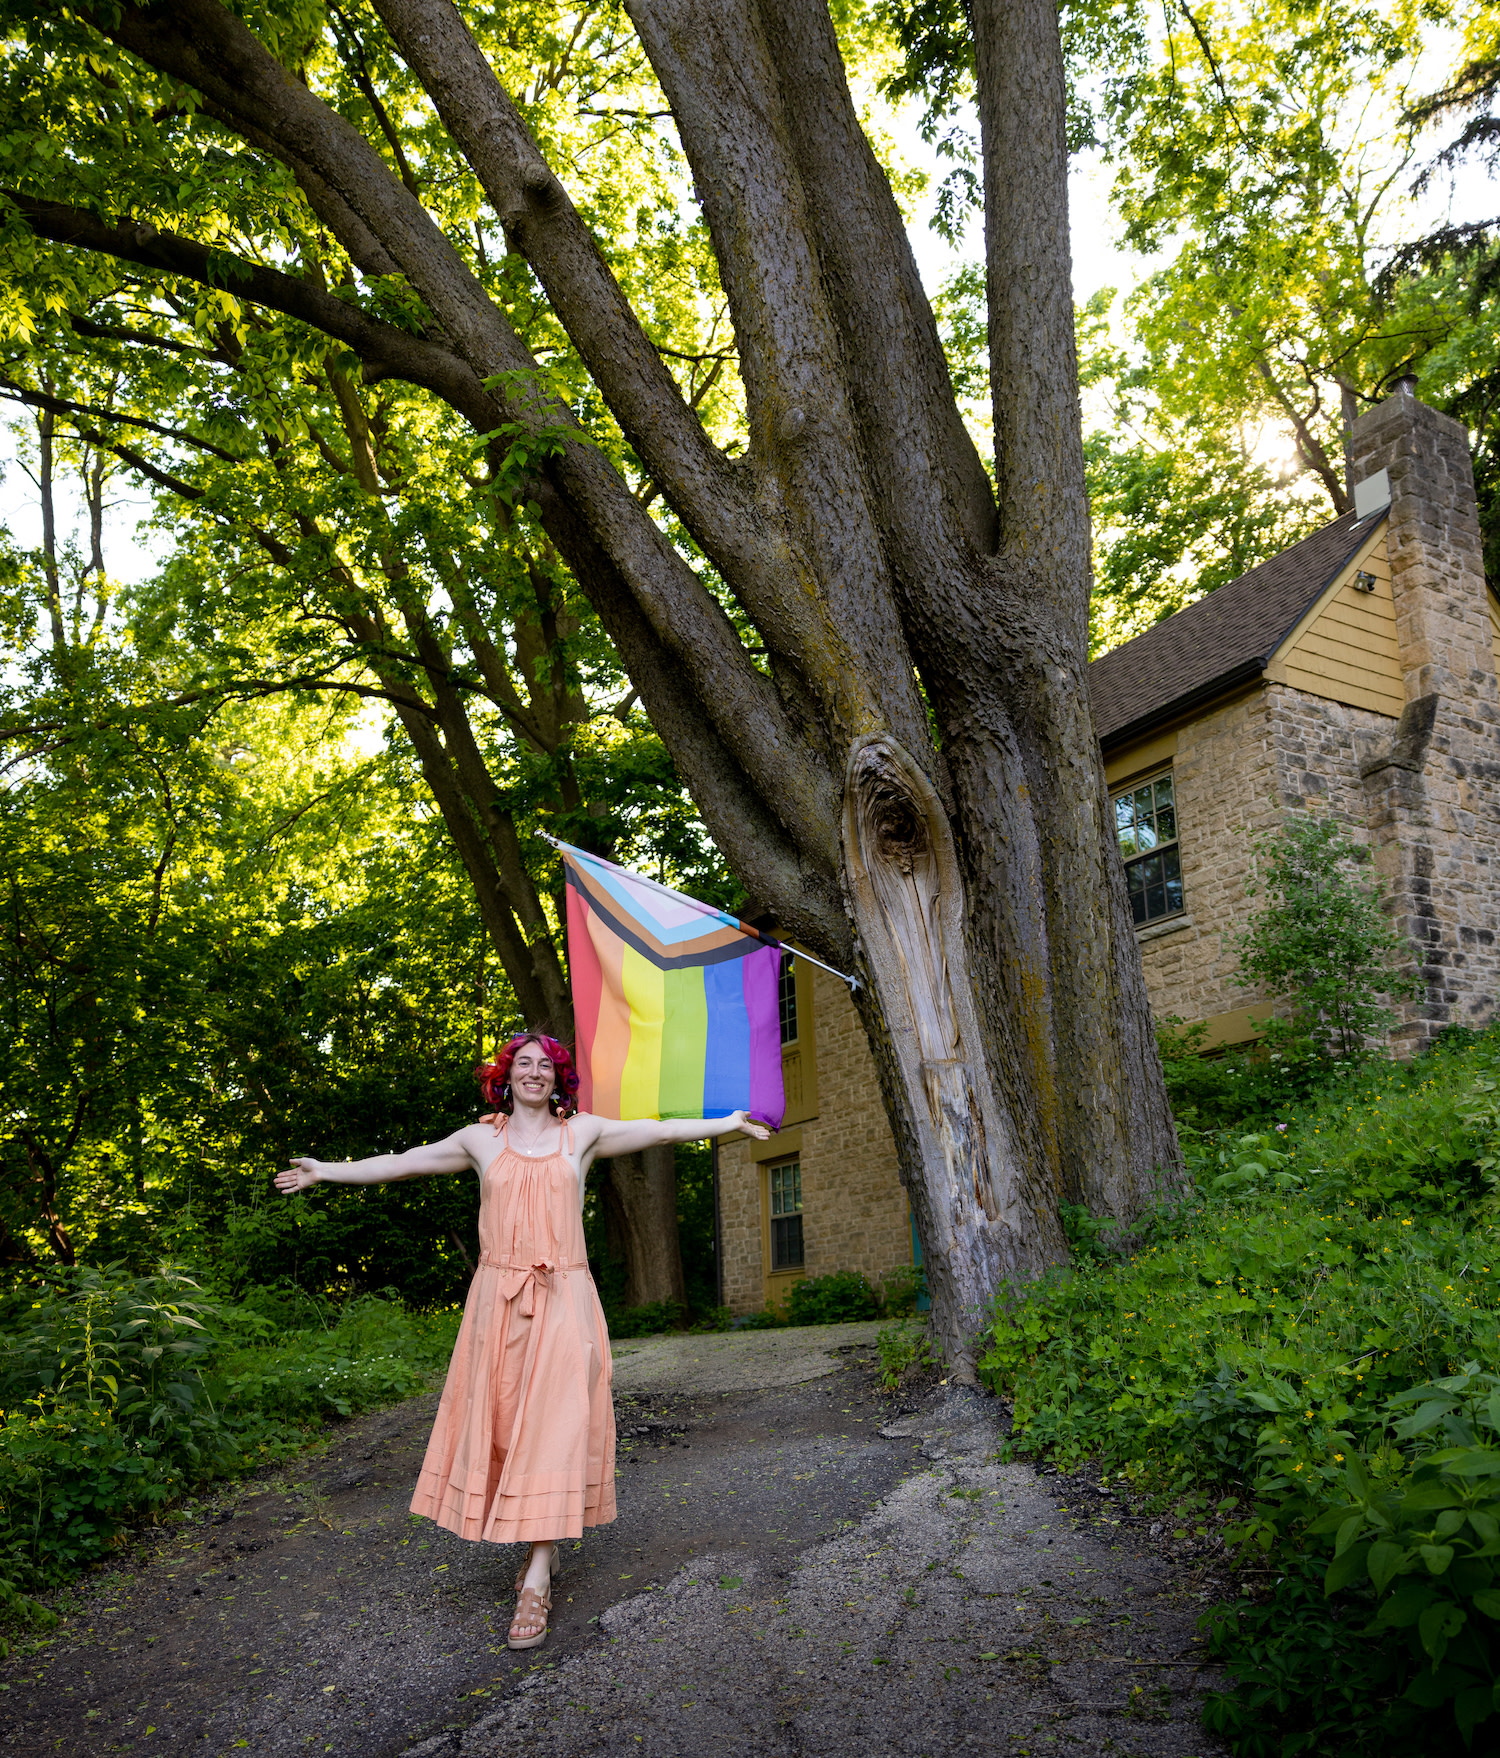 Kyler stands in front of her house, smiling with arms outstretched in front of a Pride flag.